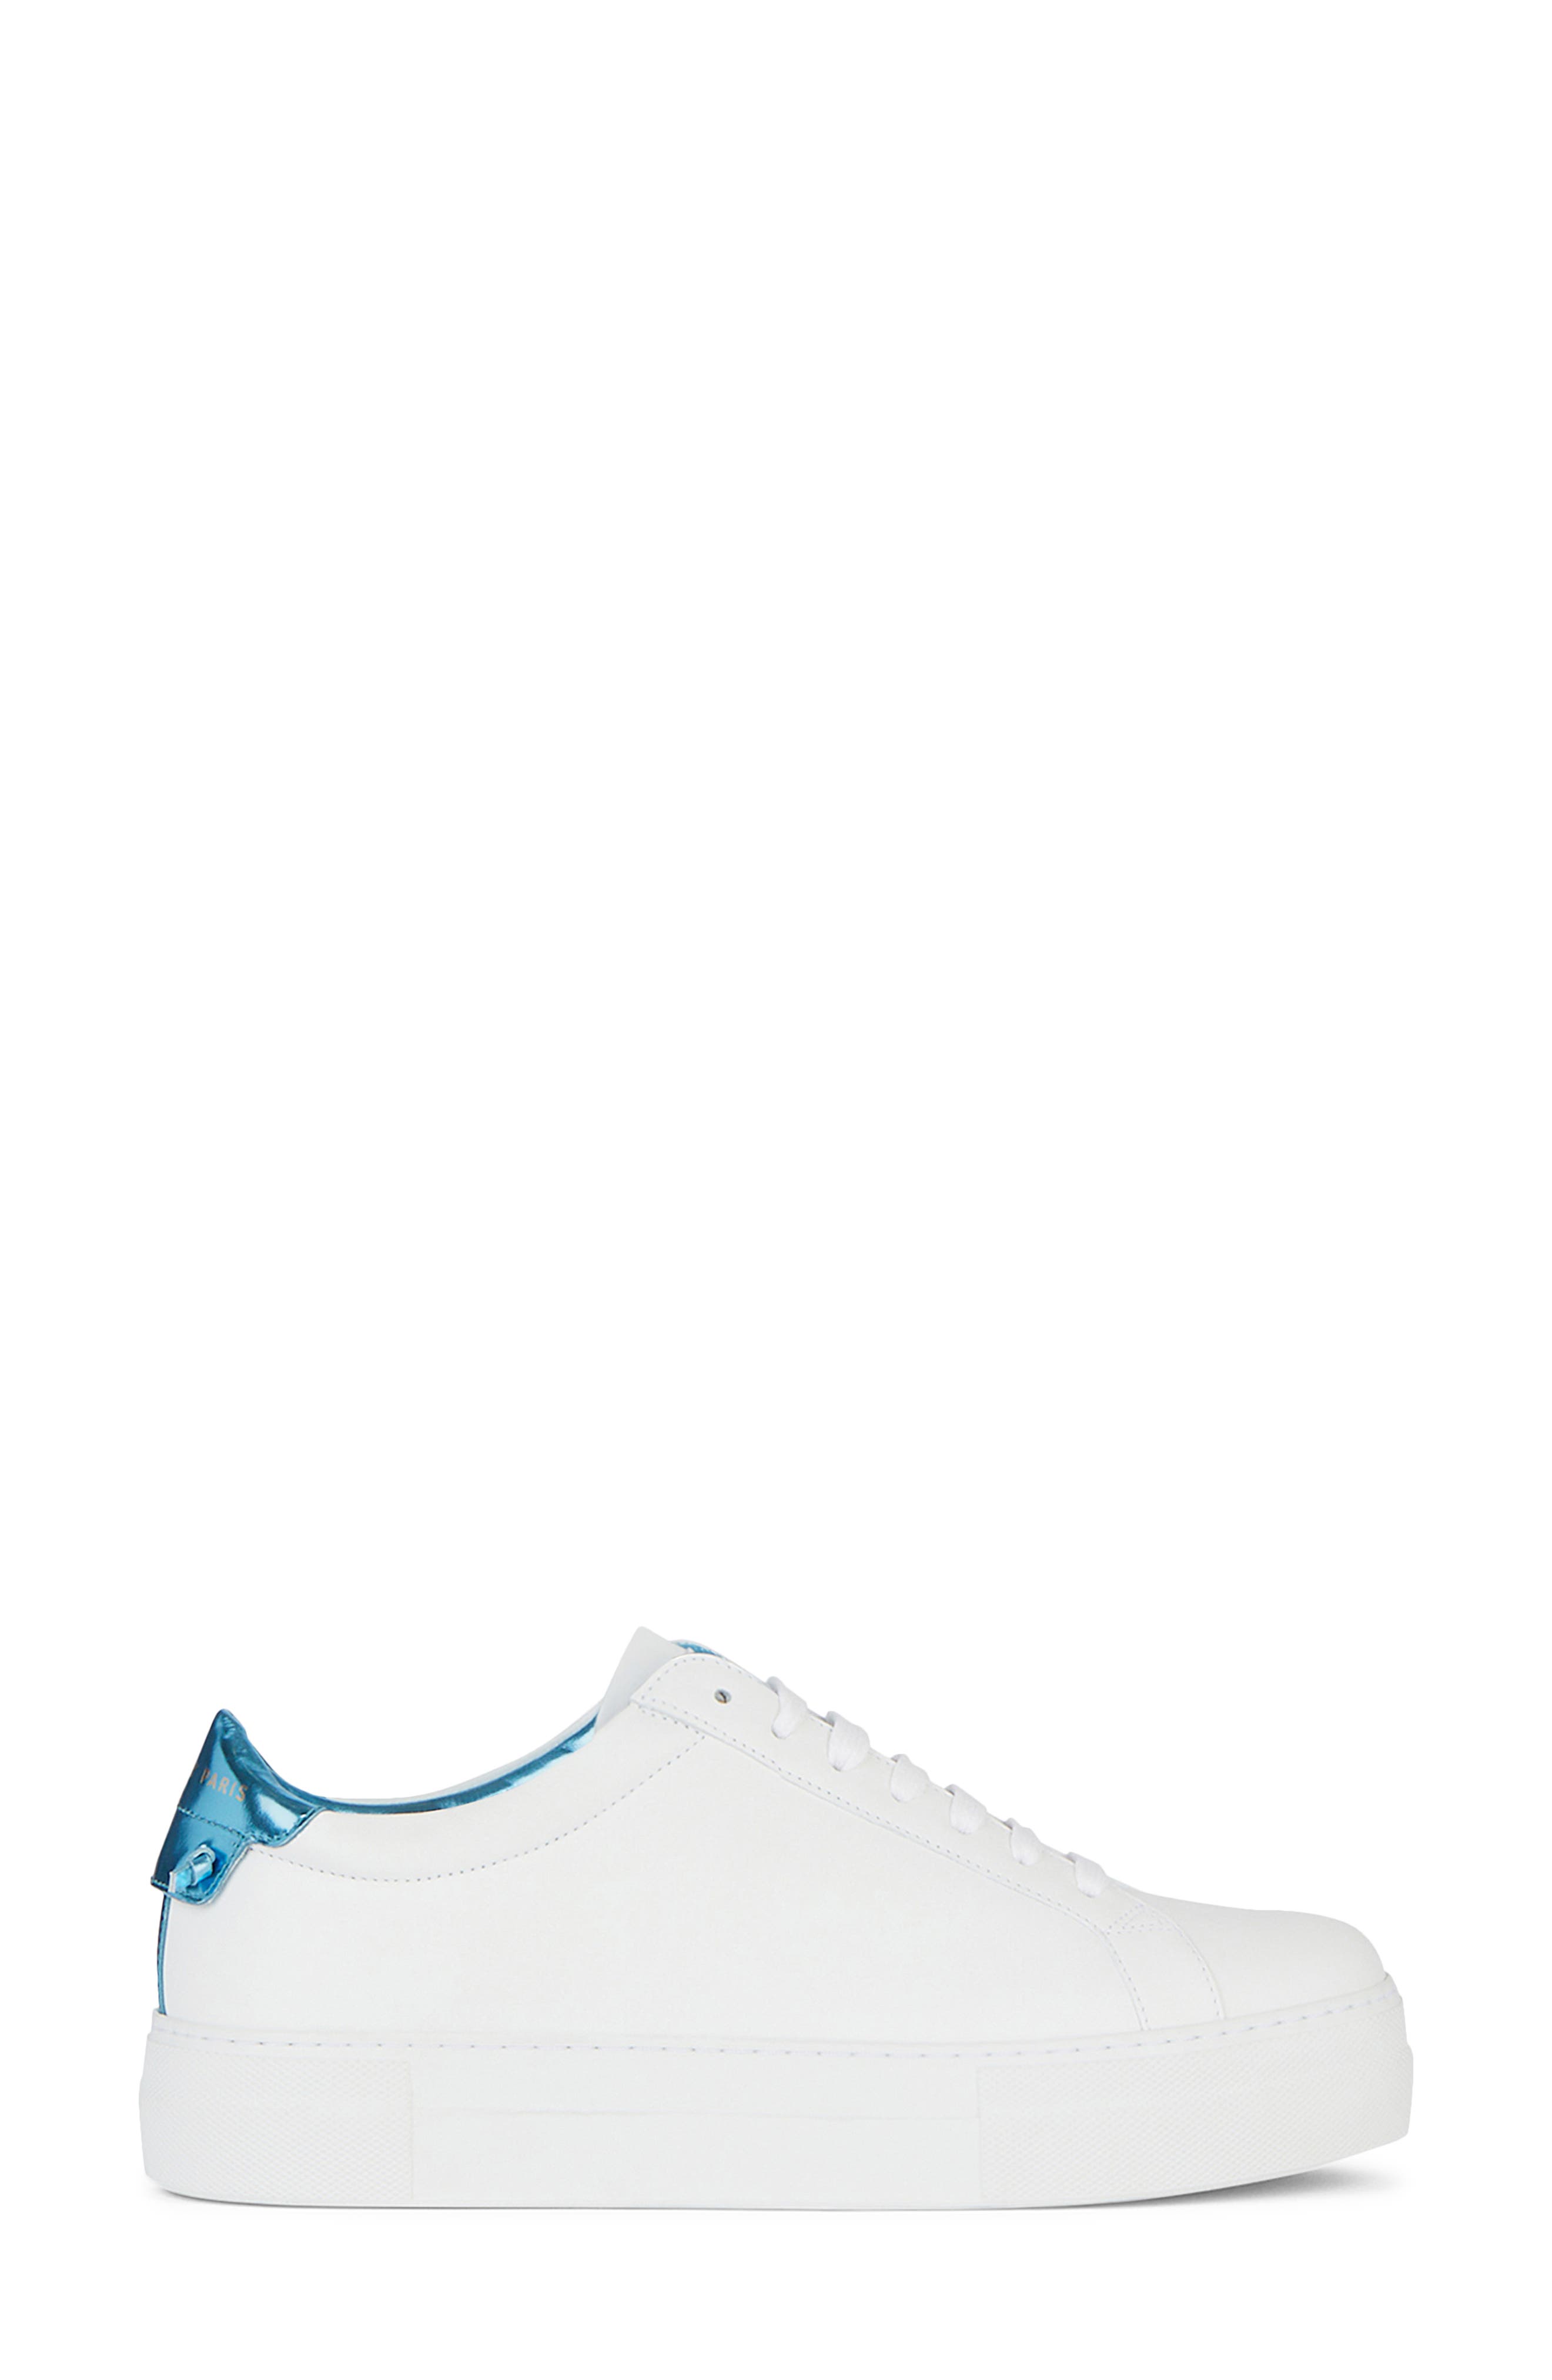 givenchy tennis shoes womens